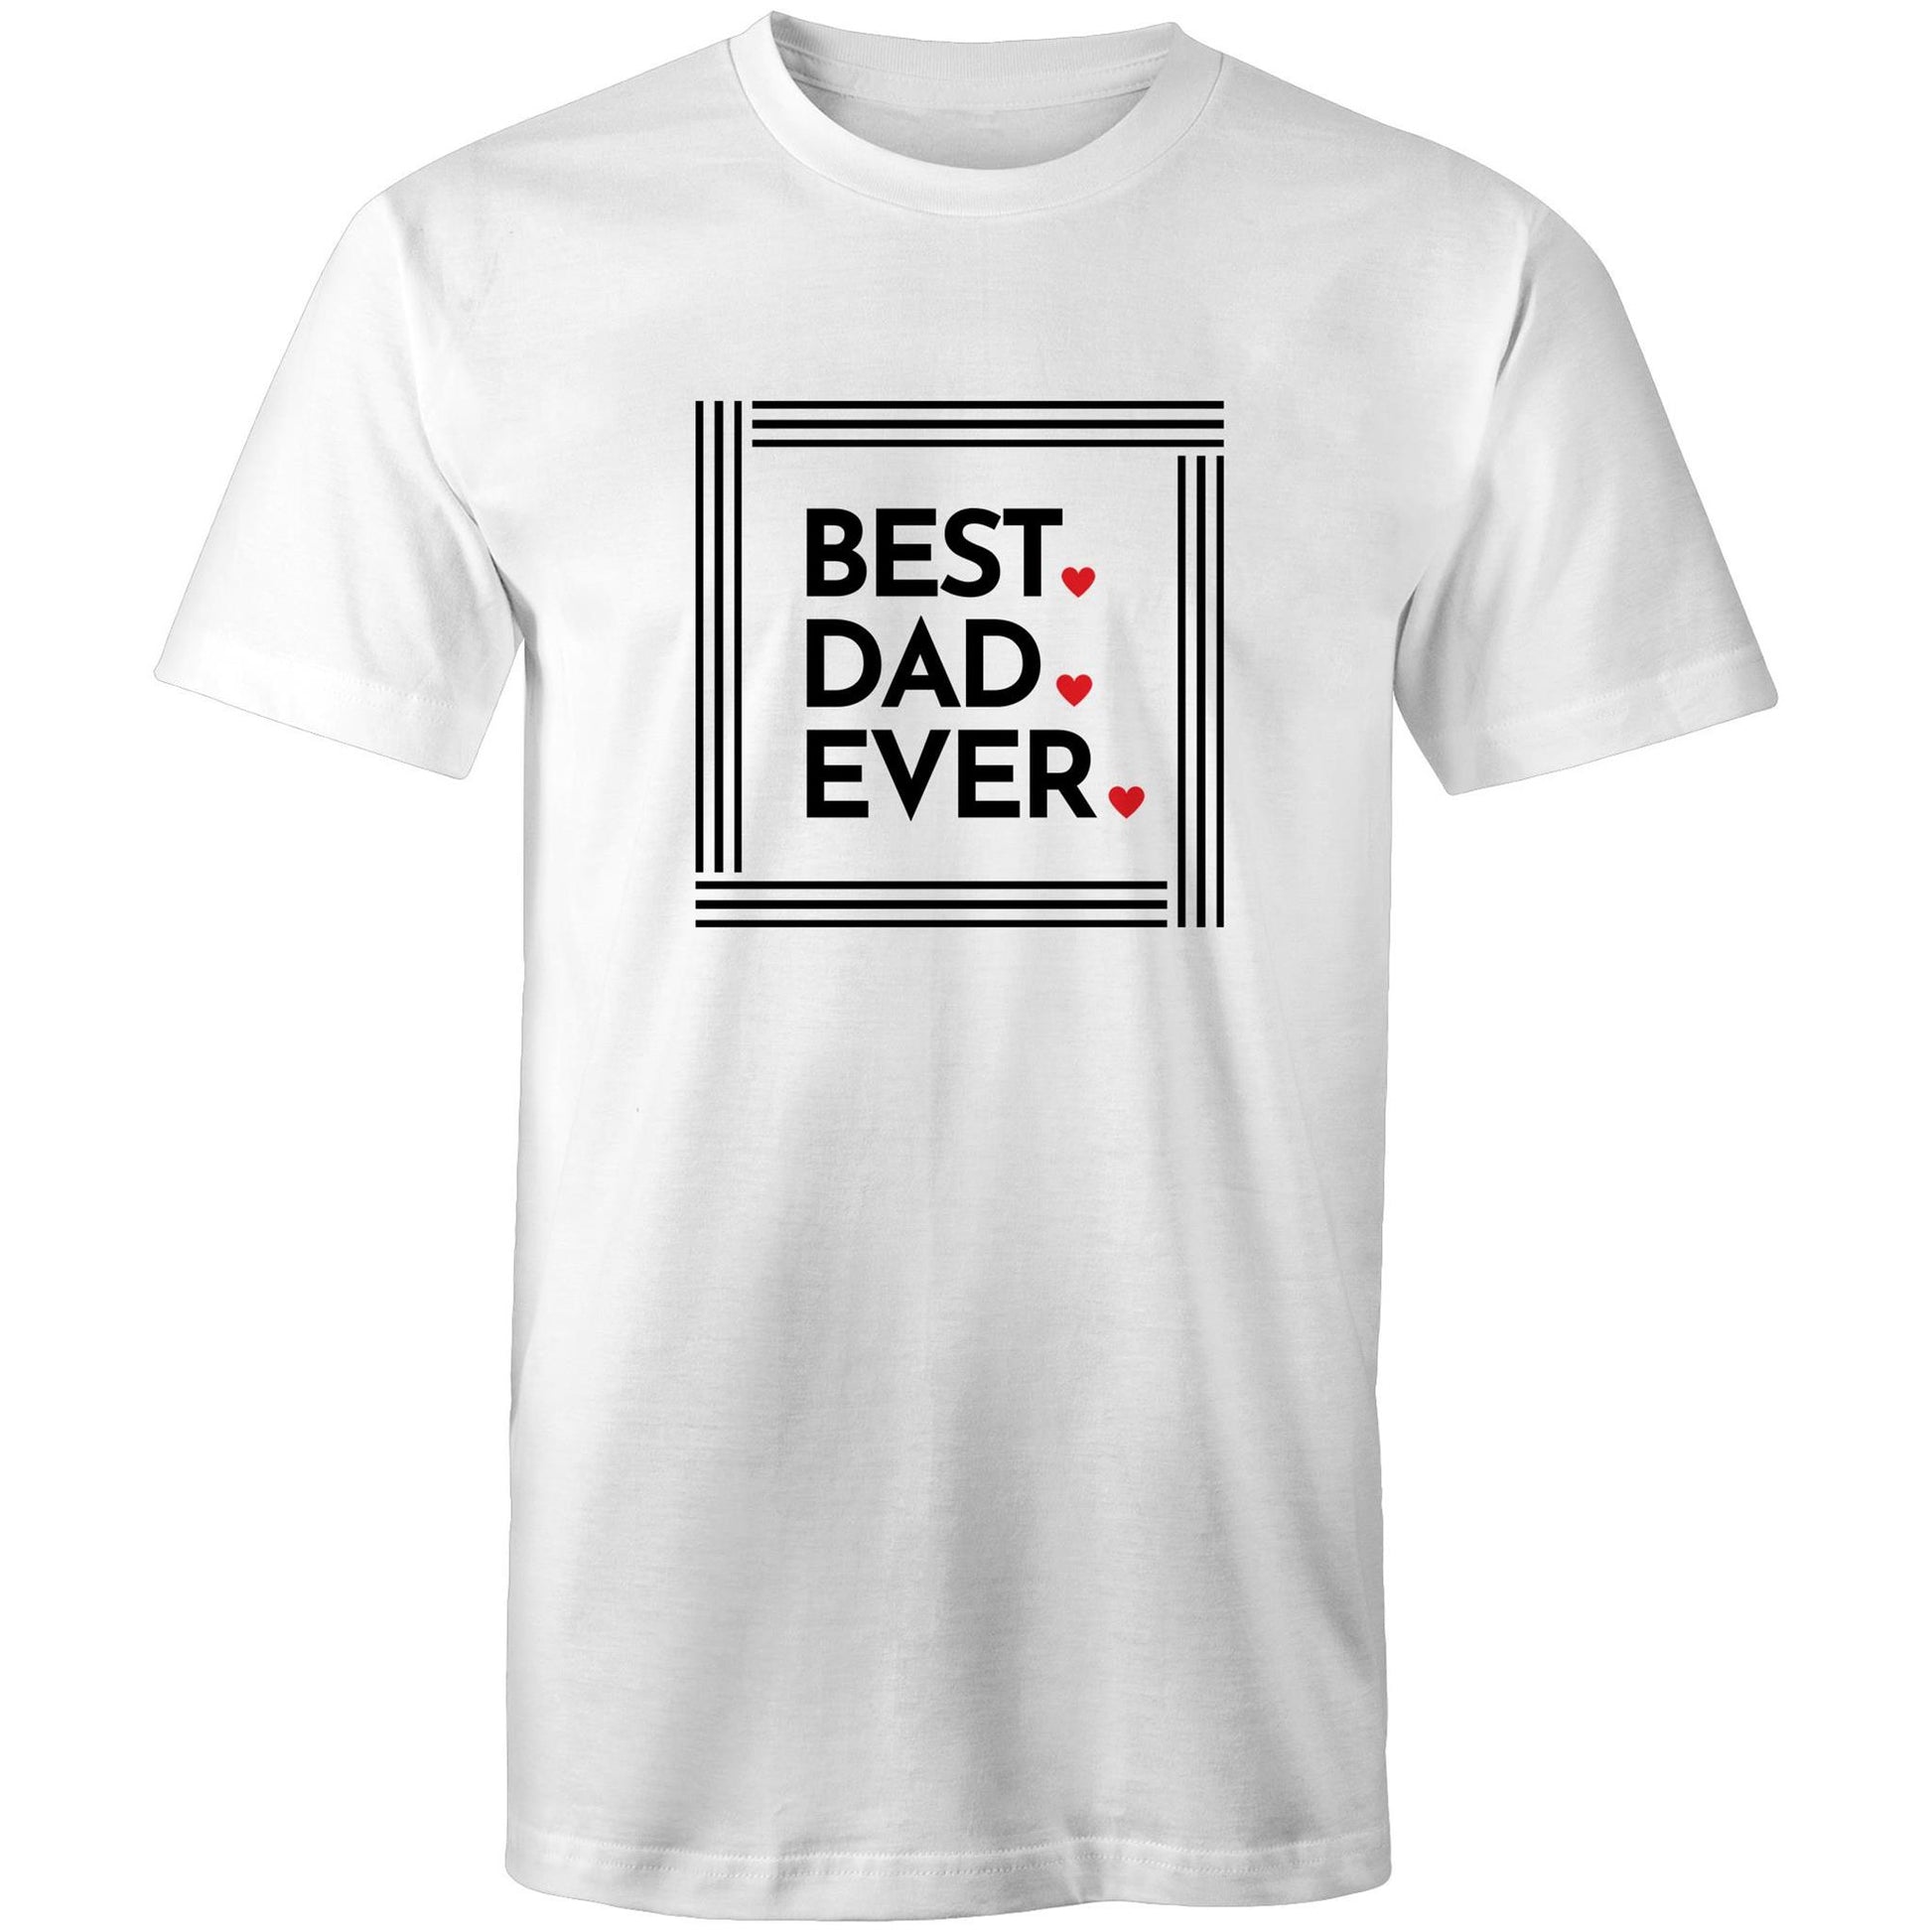 Best Dad Ever - Mens T-Shirt White Mens T-shirt Dad